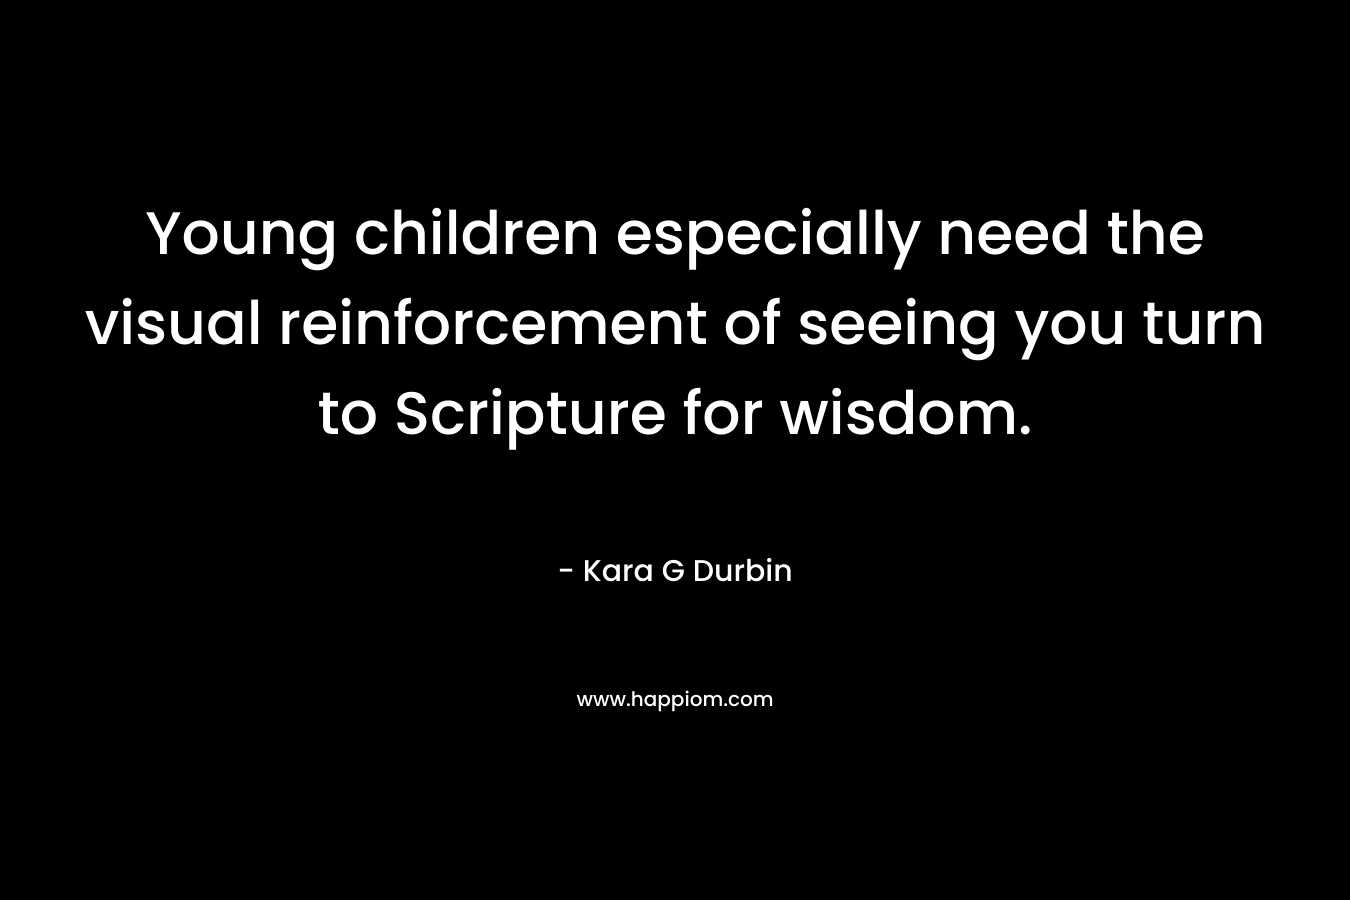 Young children especially need the visual reinforcement of seeing you turn to Scripture for wisdom.